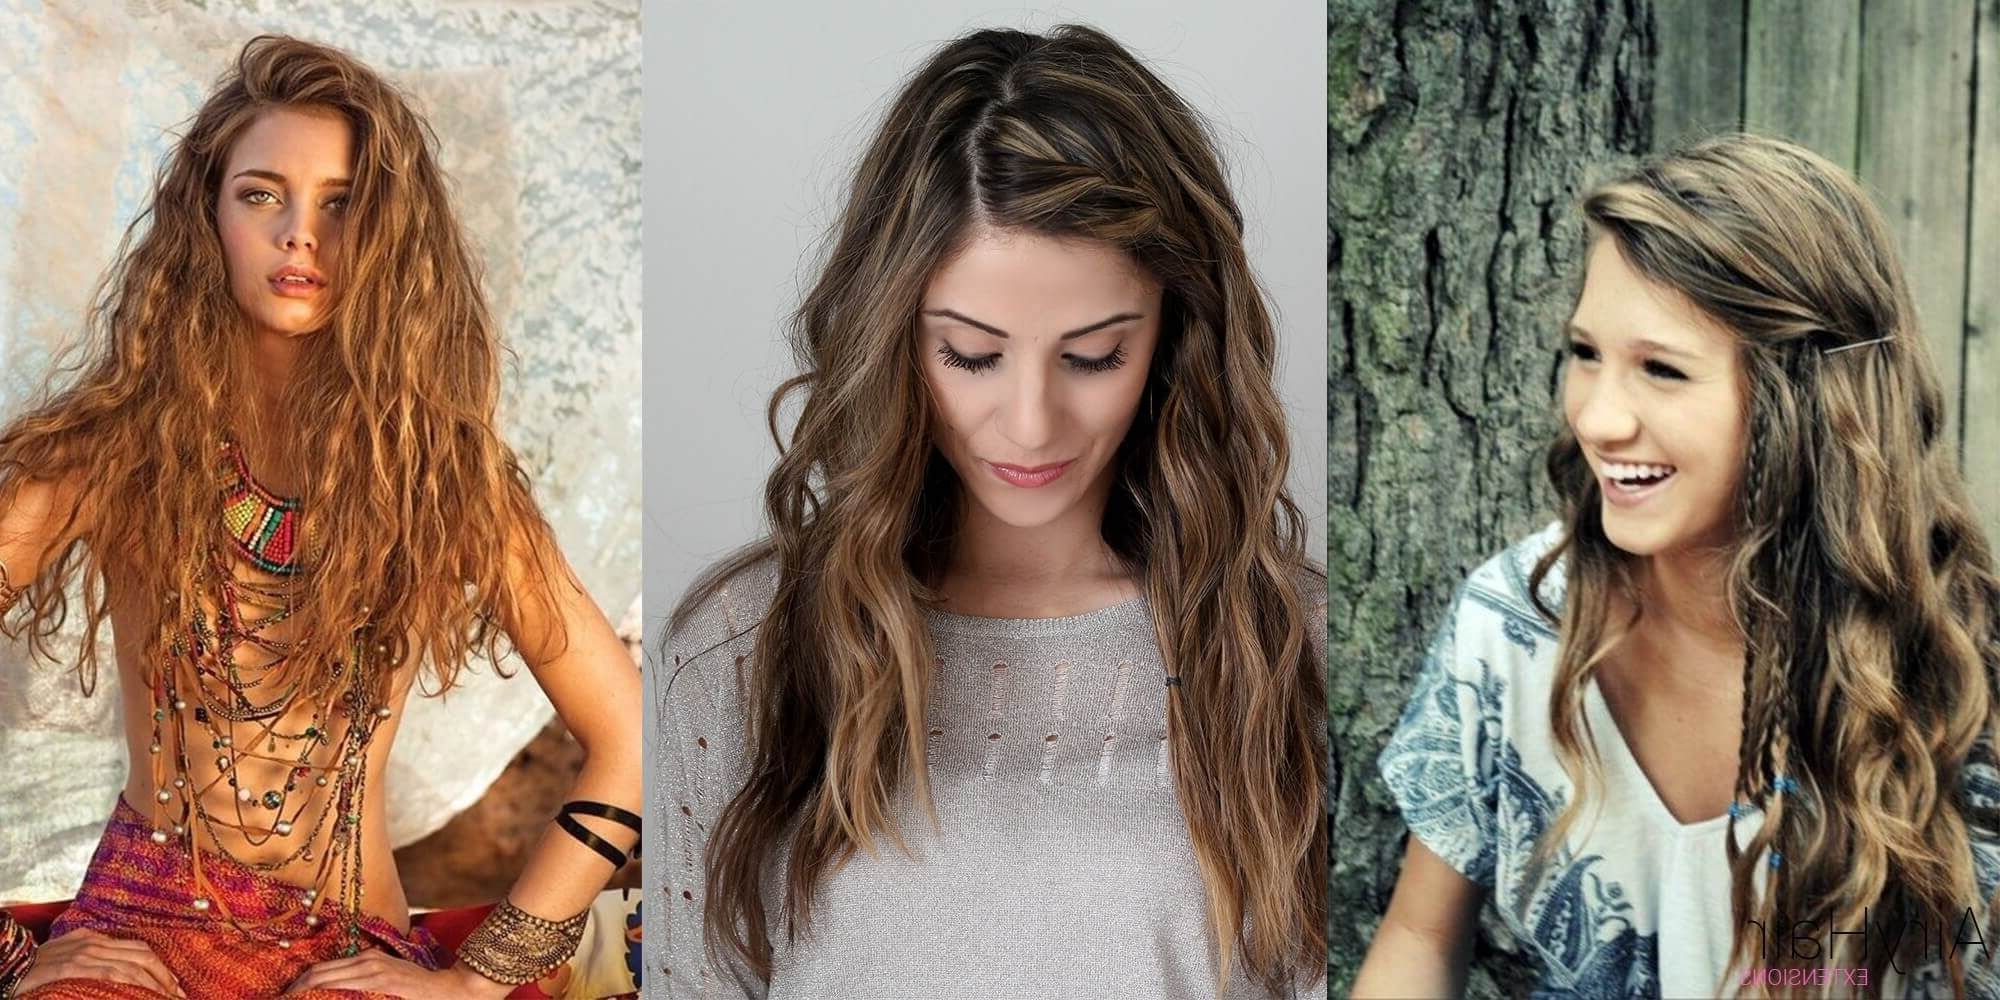 10 Best Chic And Creative Boho Hairstyles Intended For Most Current Bohemian Medium Hairstyles (View 4 of 20)